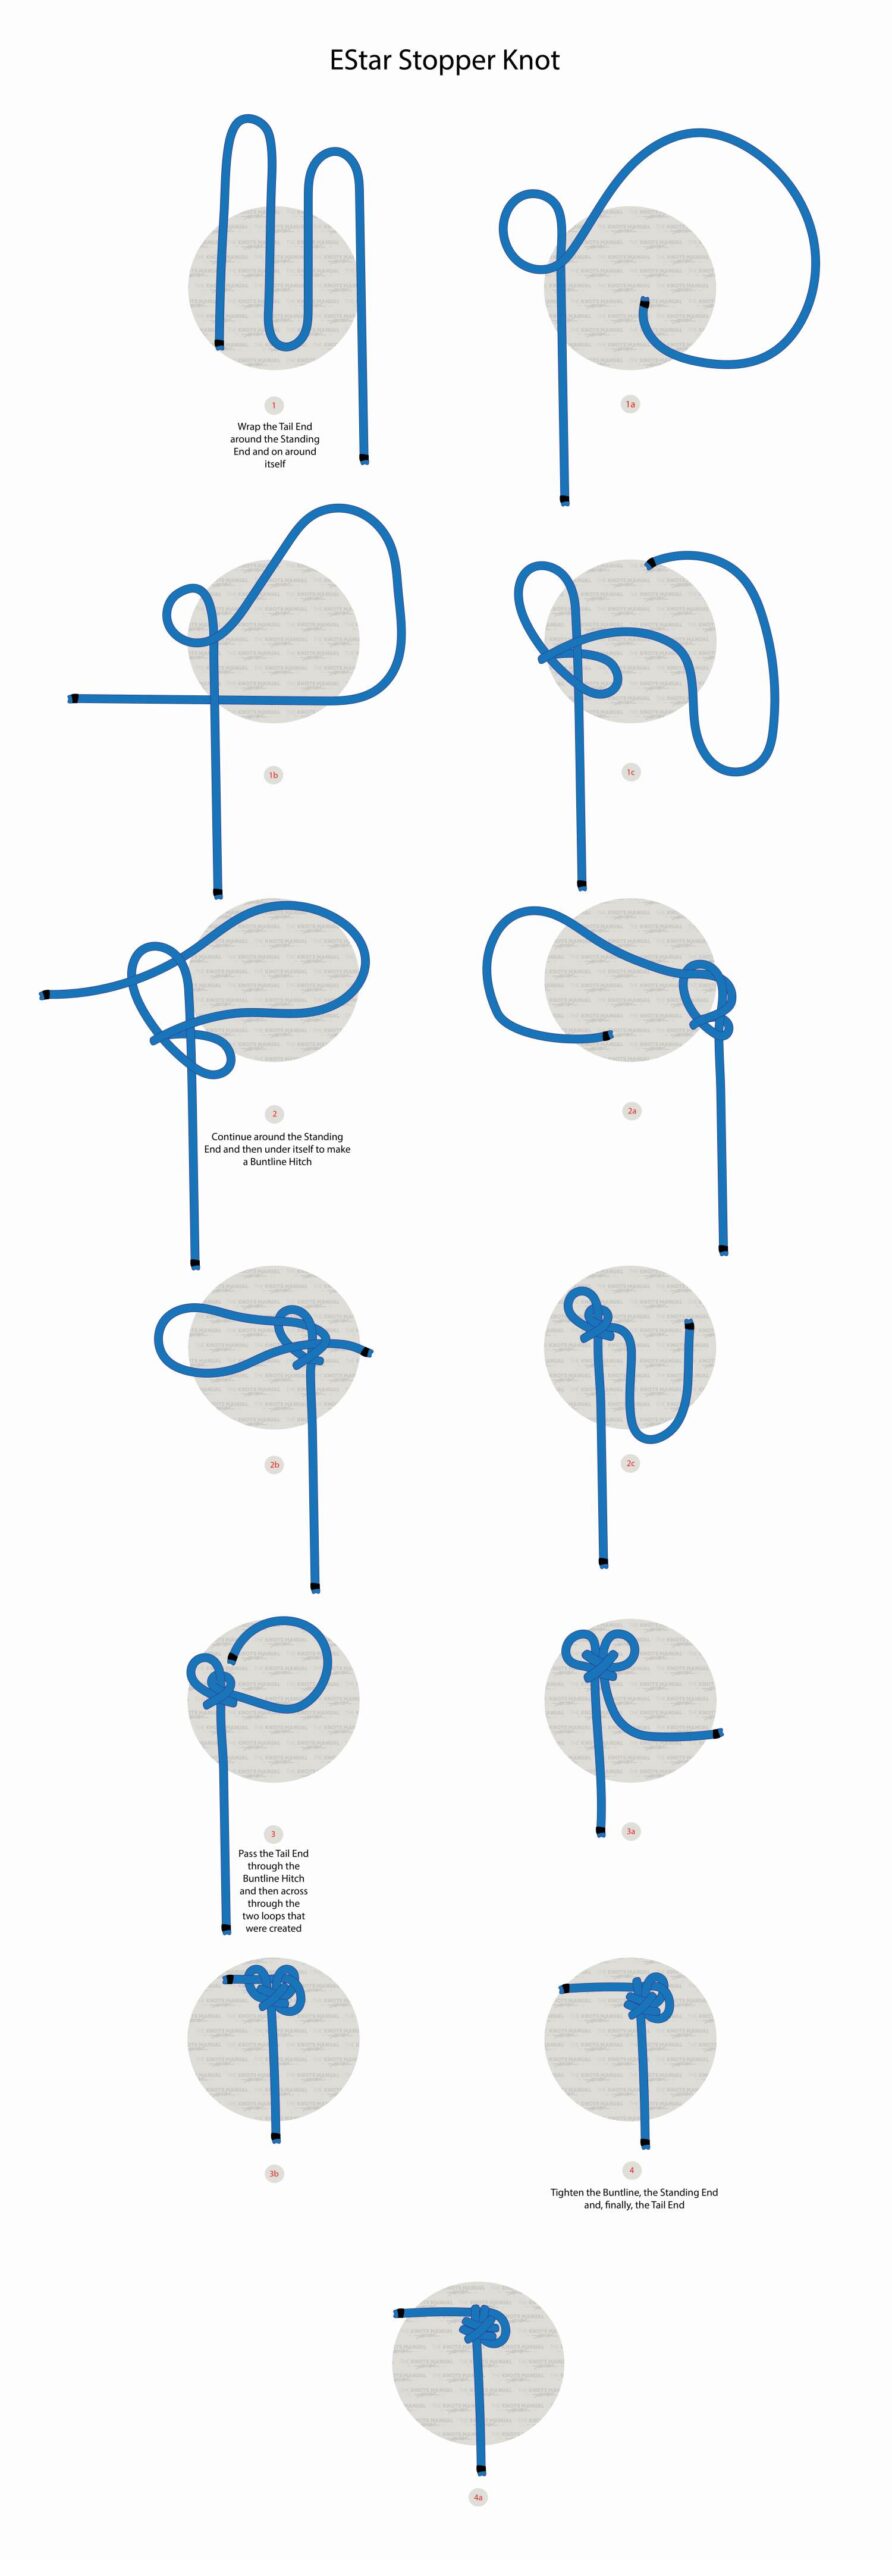 How to Tie the EStar Stopper Knot (Quick Guide)